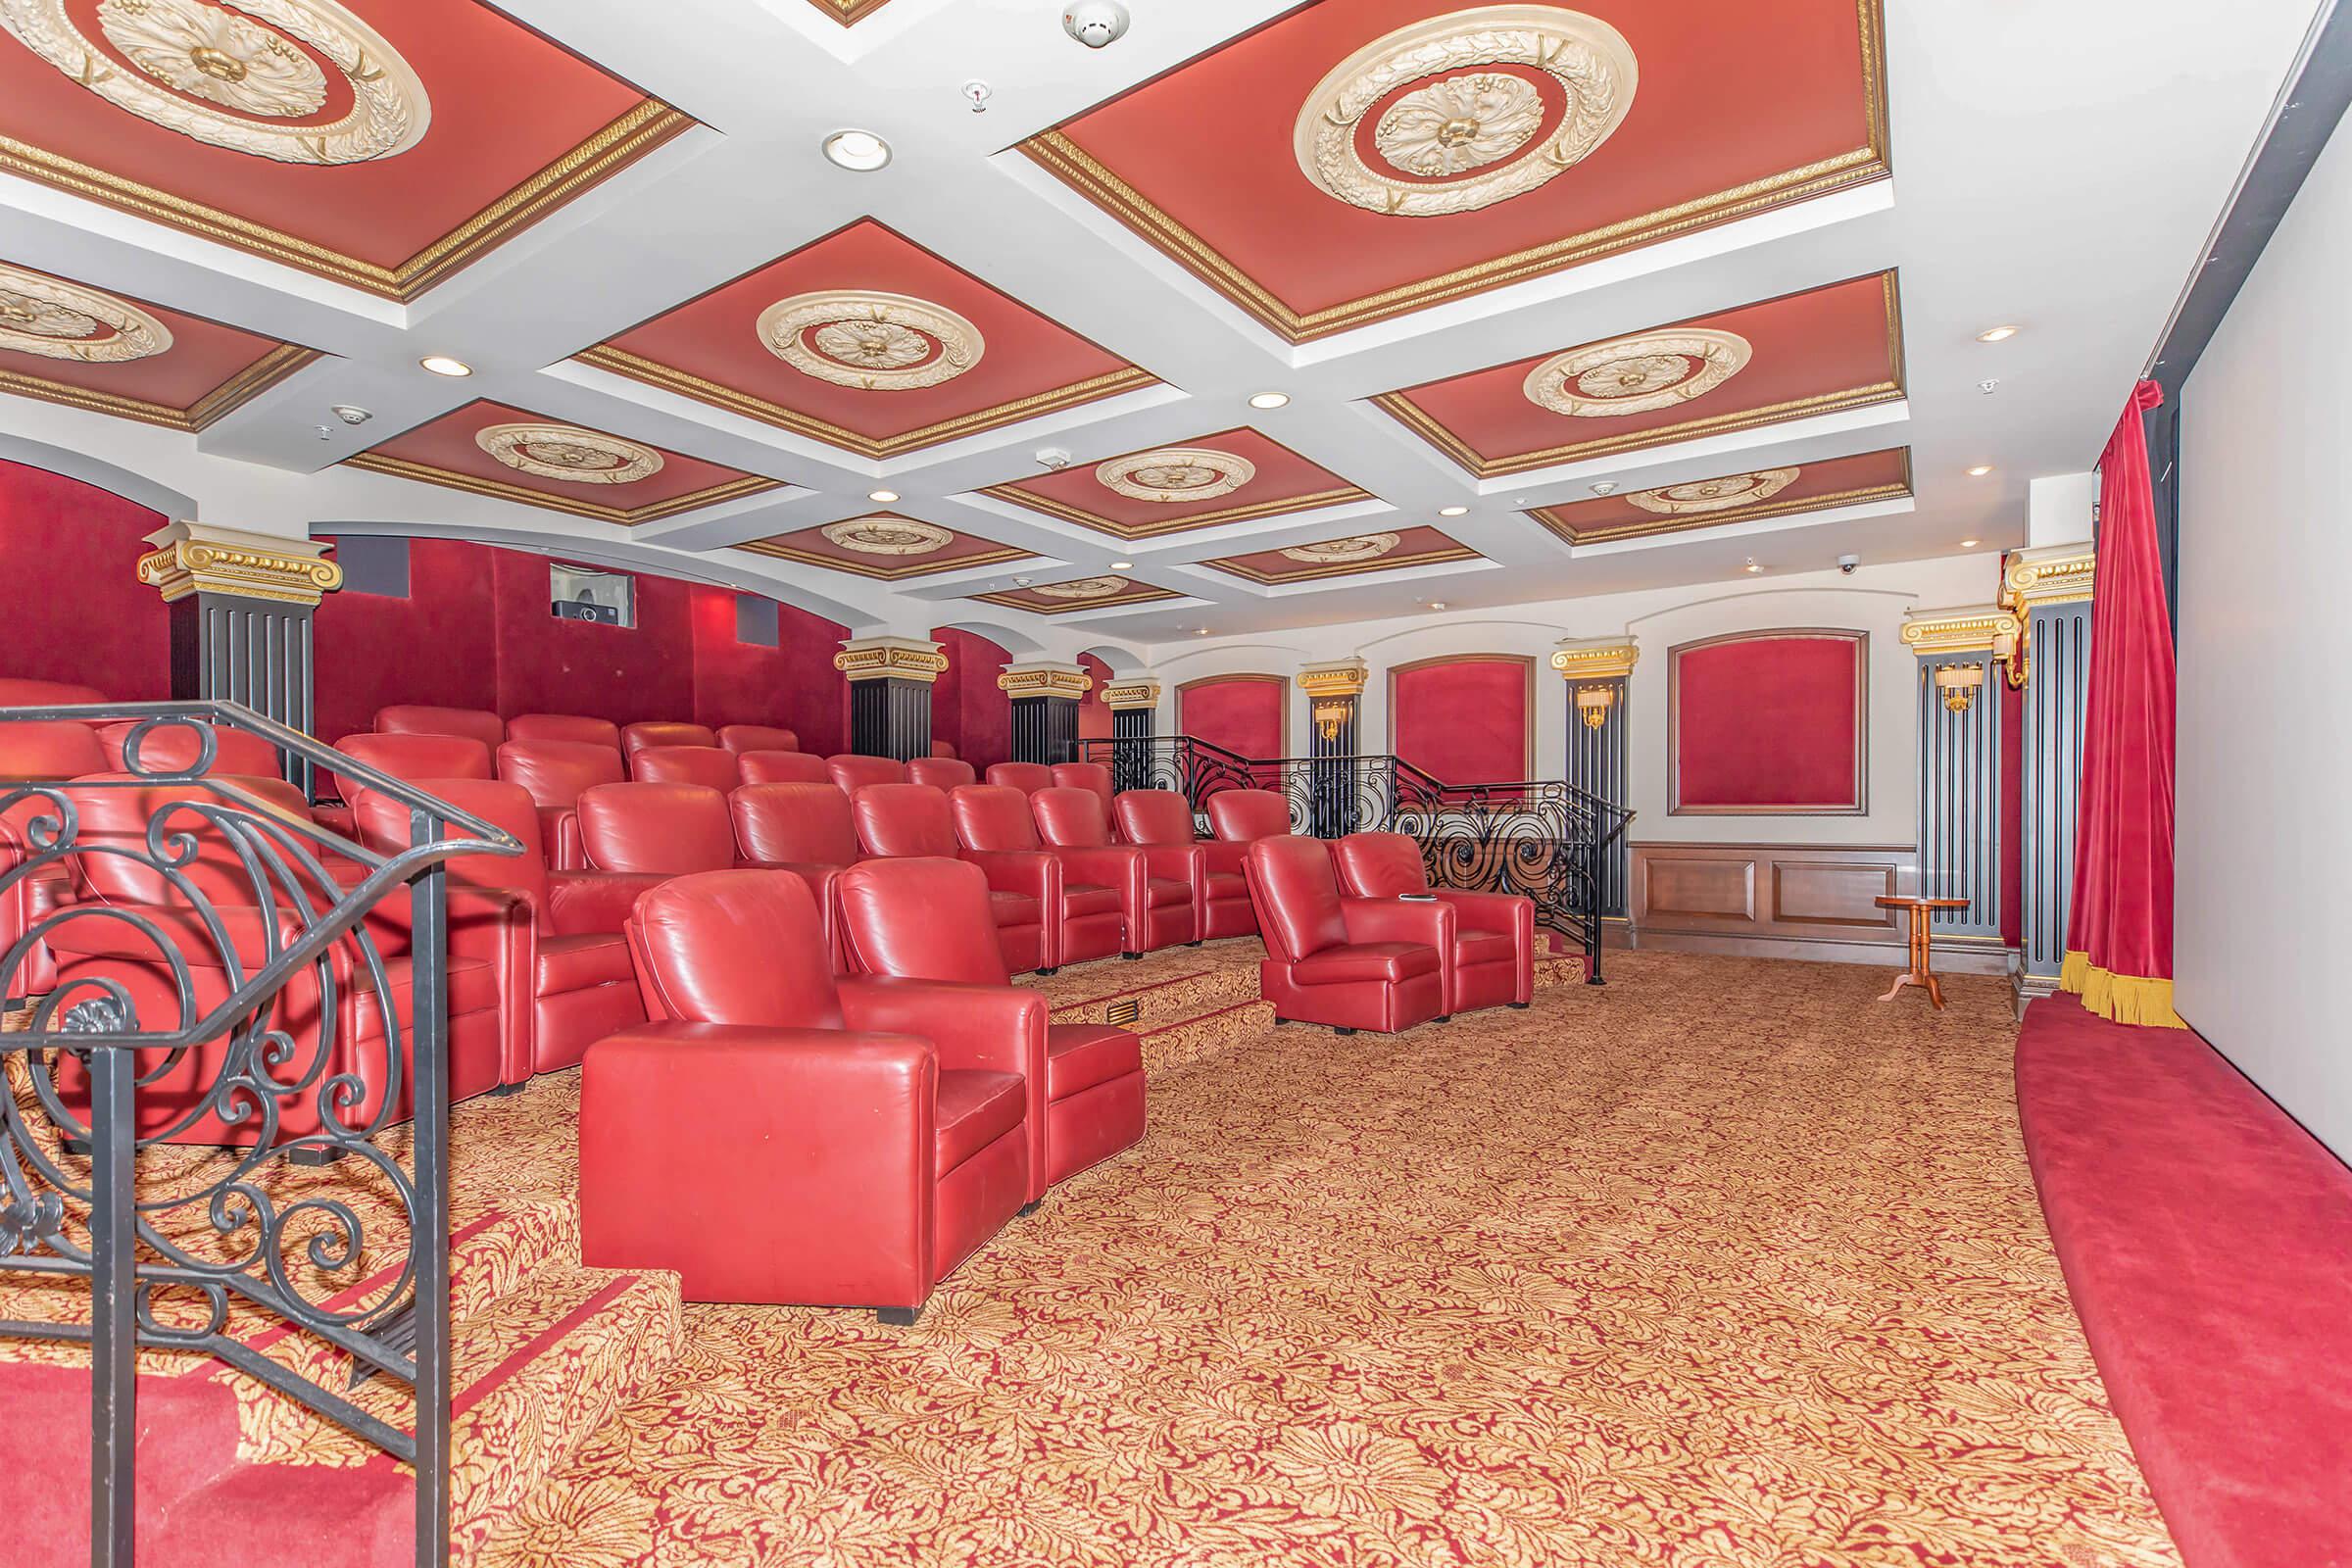 The Orsini movie theater with red chairs